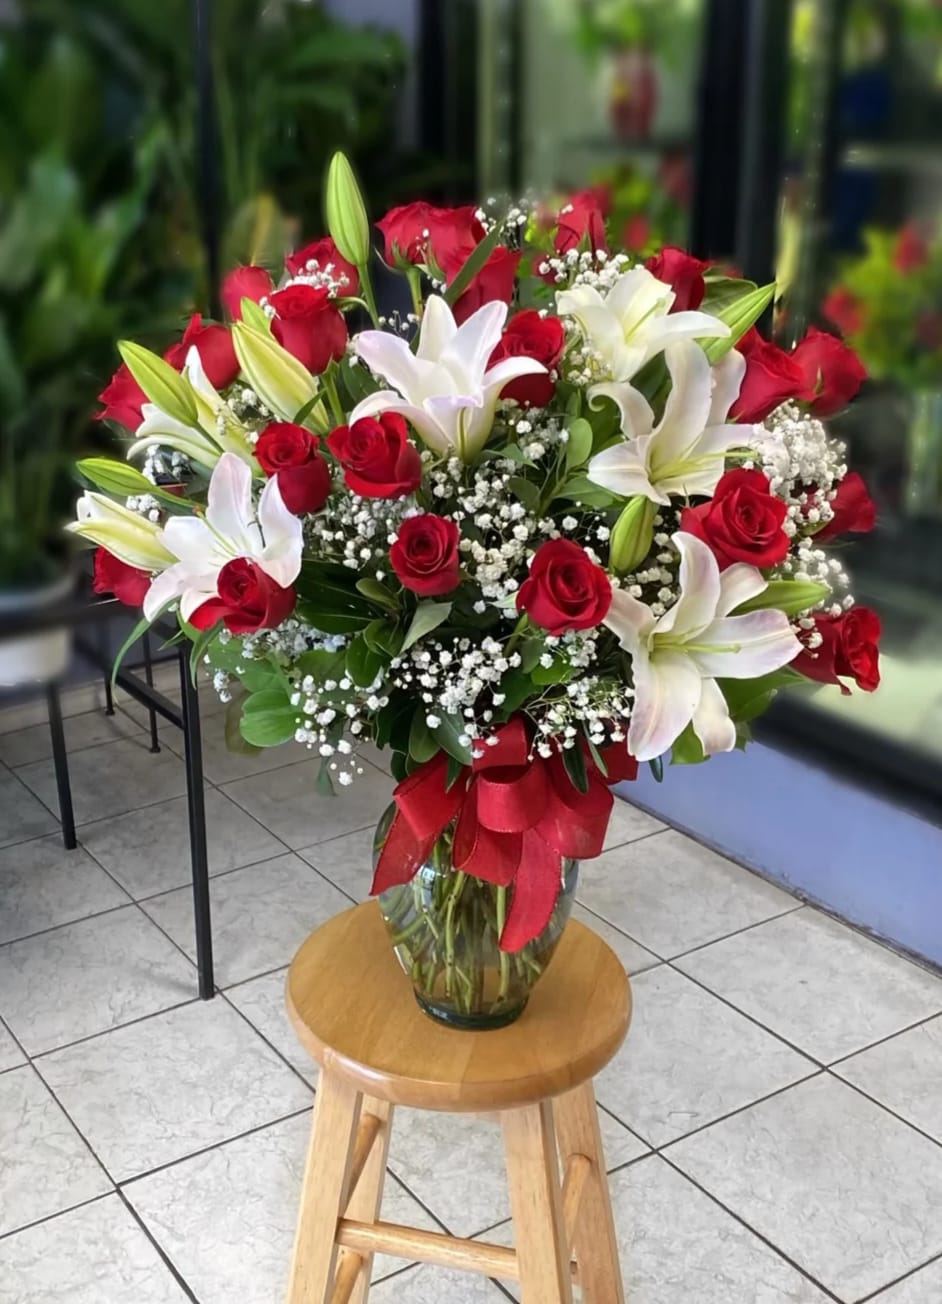 A clear vase holds a captivating mix of red roses and white